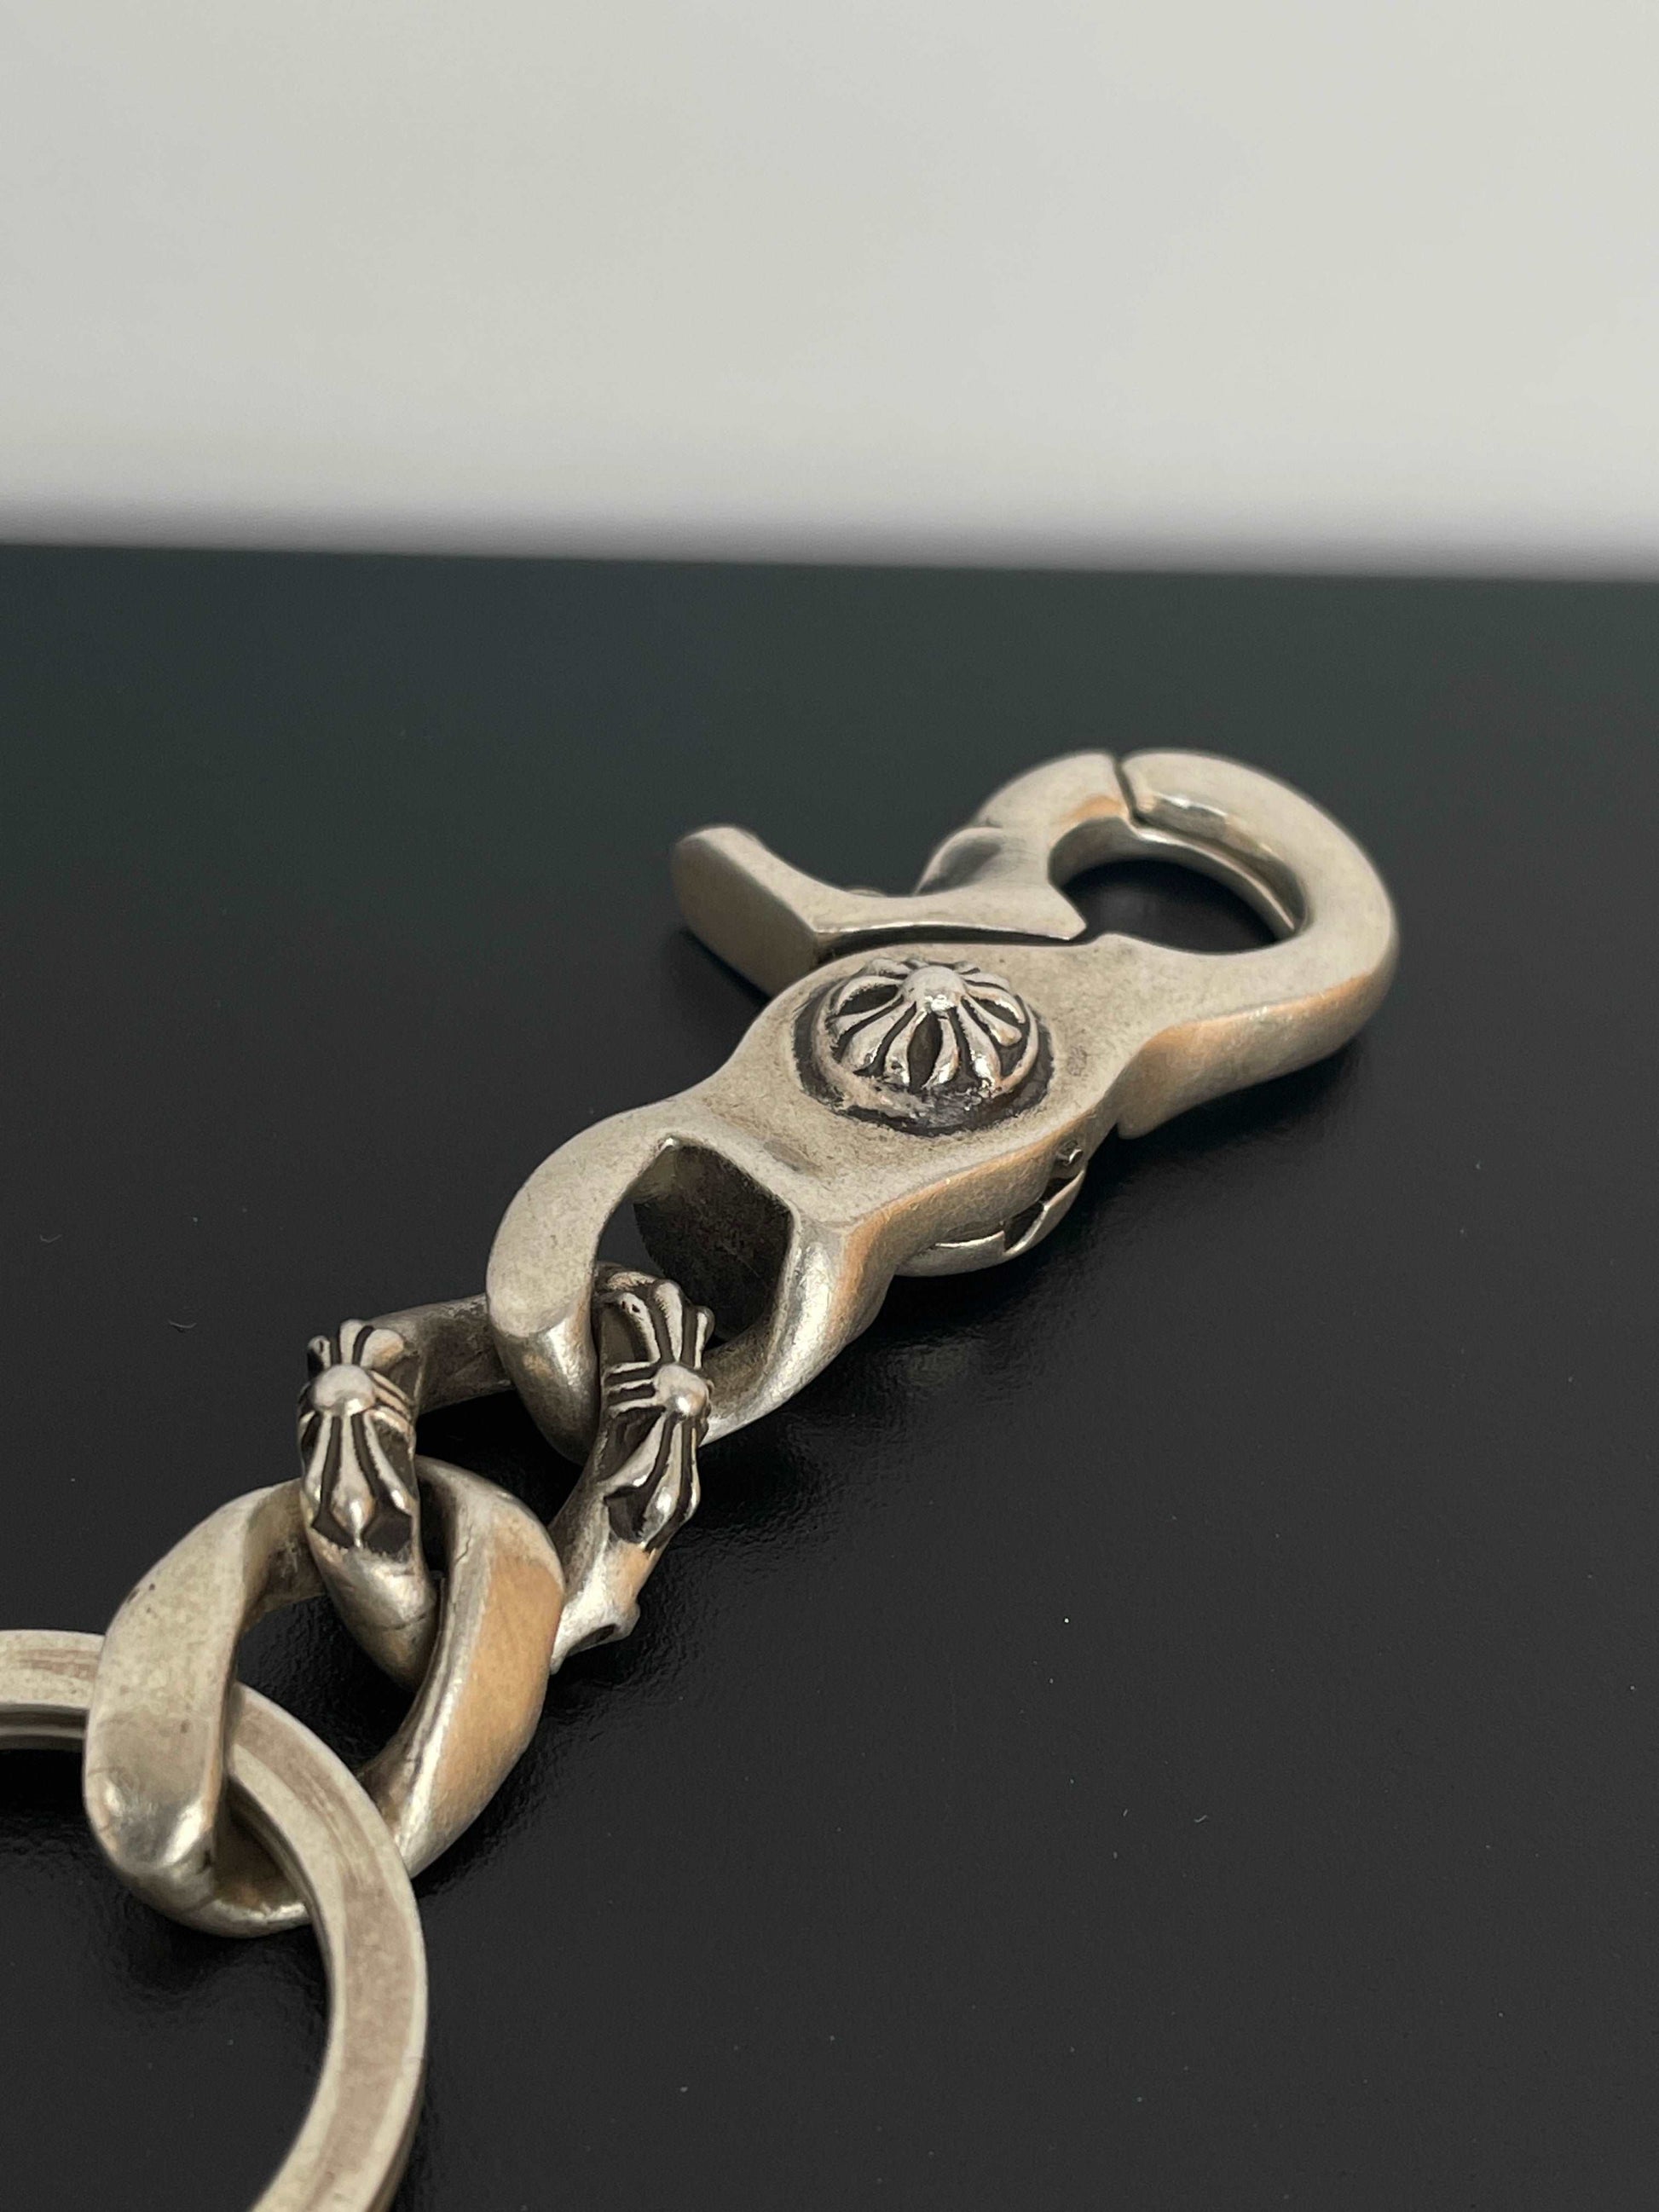 Chrome Hearts Fancy Link Keychain With Dagger Charm Key Ring